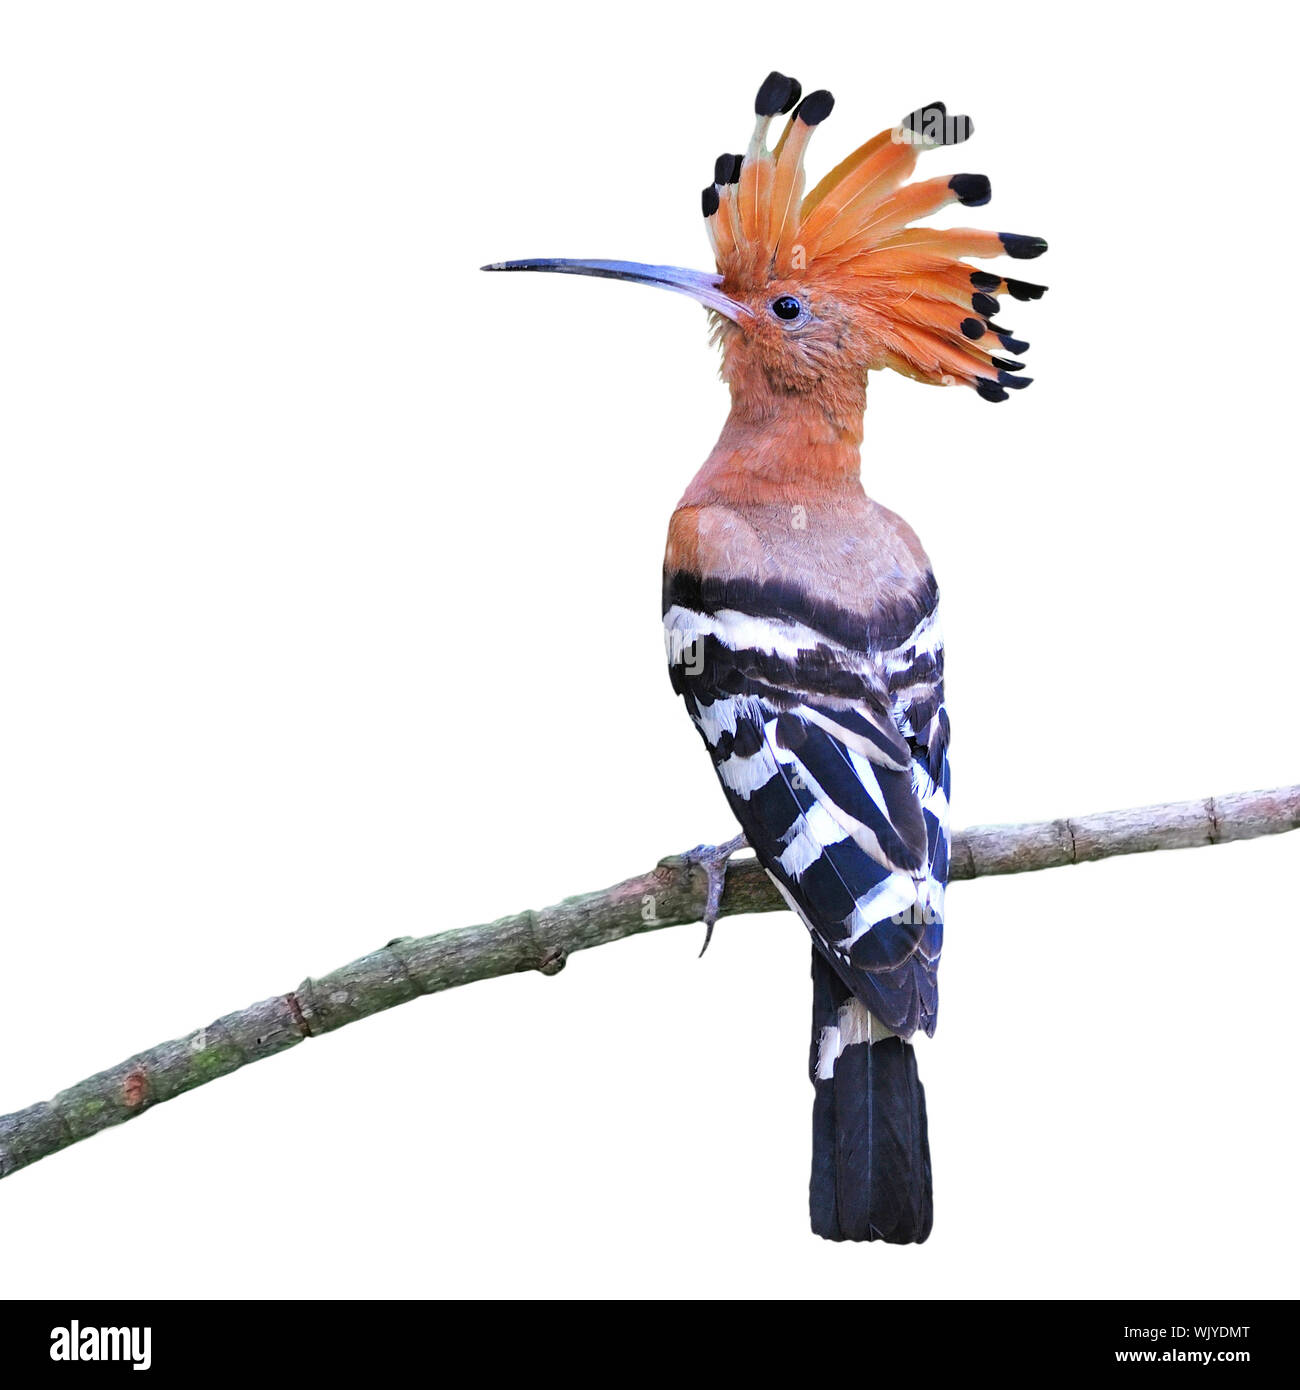 Colorful Hoopoe, Eurasian Hoopoe (Upupa epops), back profile, standing on a branch, isolated on a white background Stock Photo